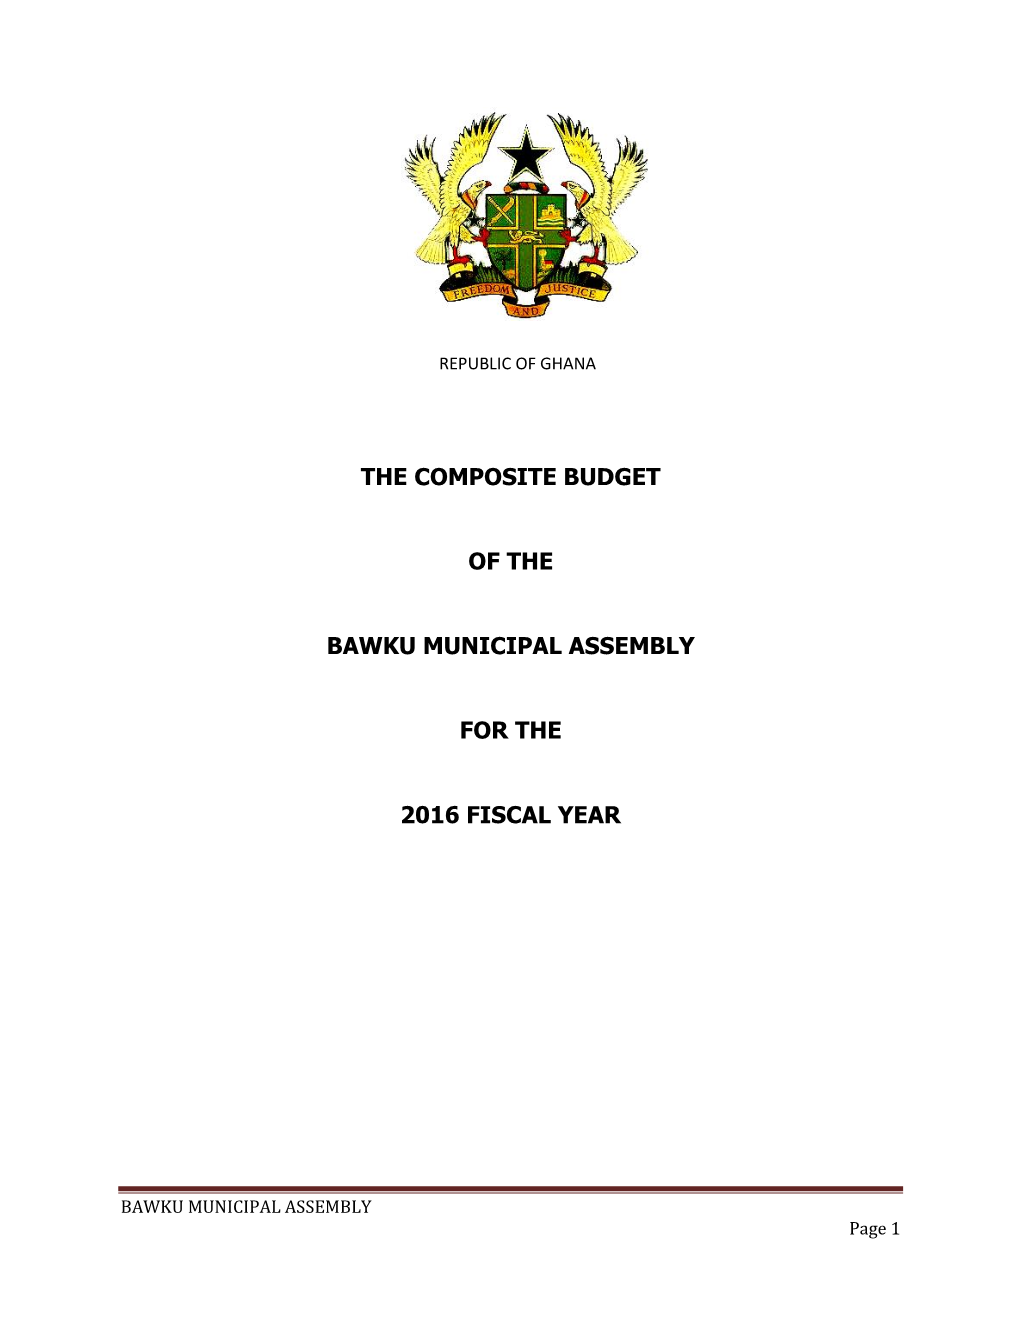 The Composite Budget of the Bawku Municipal Assembly for the 2016 Fiscal Year